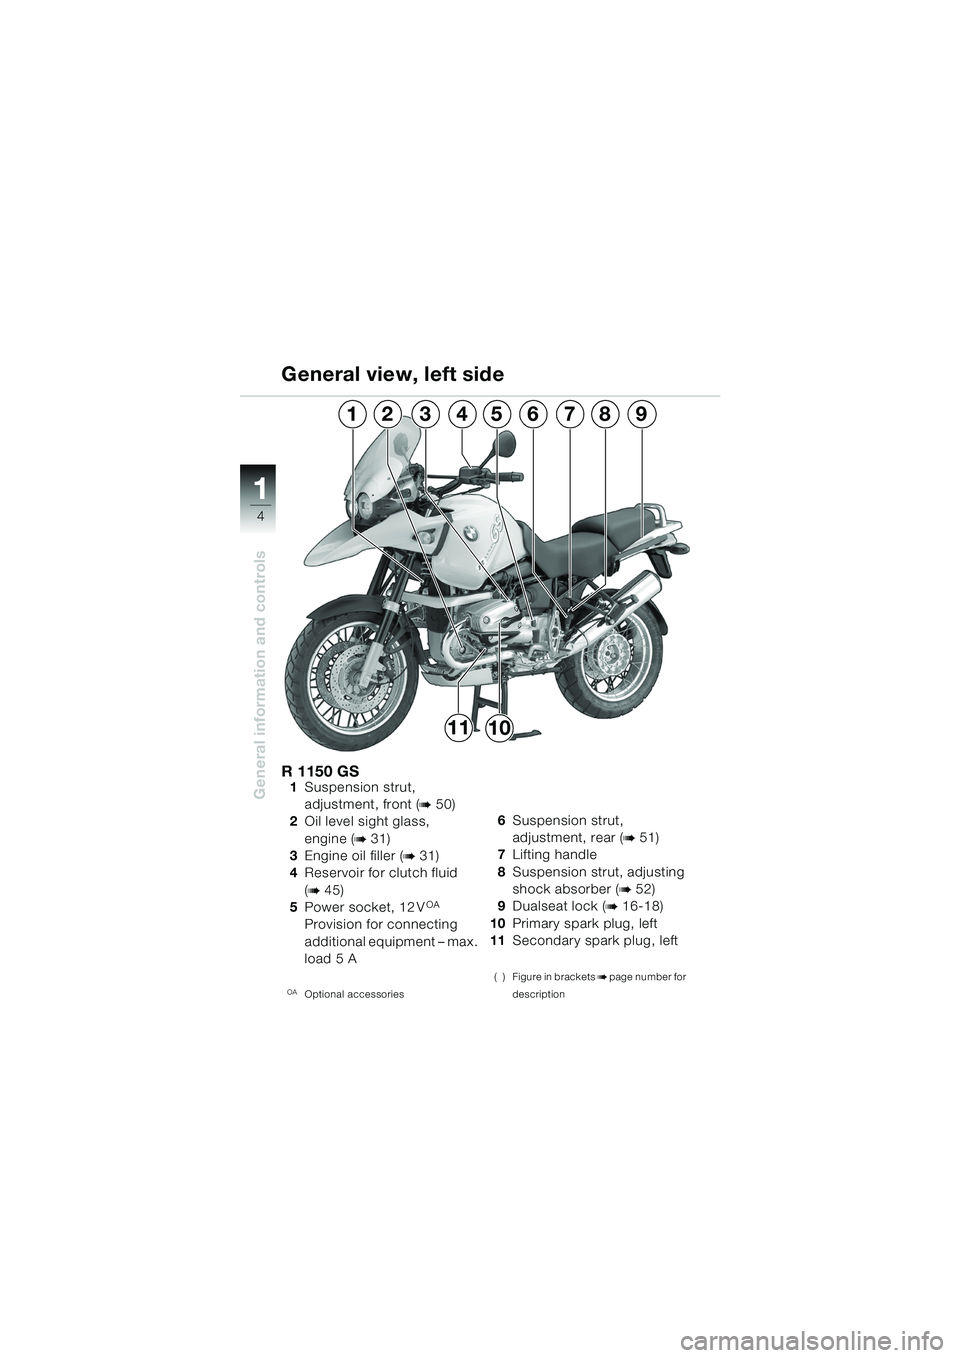 BMW MOTORRAD R 1150 GS 2002  Riders Manual (in English) 11
4
General information and controls
391256784
1011
R 1150 GS1Suspension strut,
adjustment, front (
b50)
2 Oil level sight glass, 
engine (
b31)
3 Engine oil filler (
b31)
4 Reservoir for clutch flui